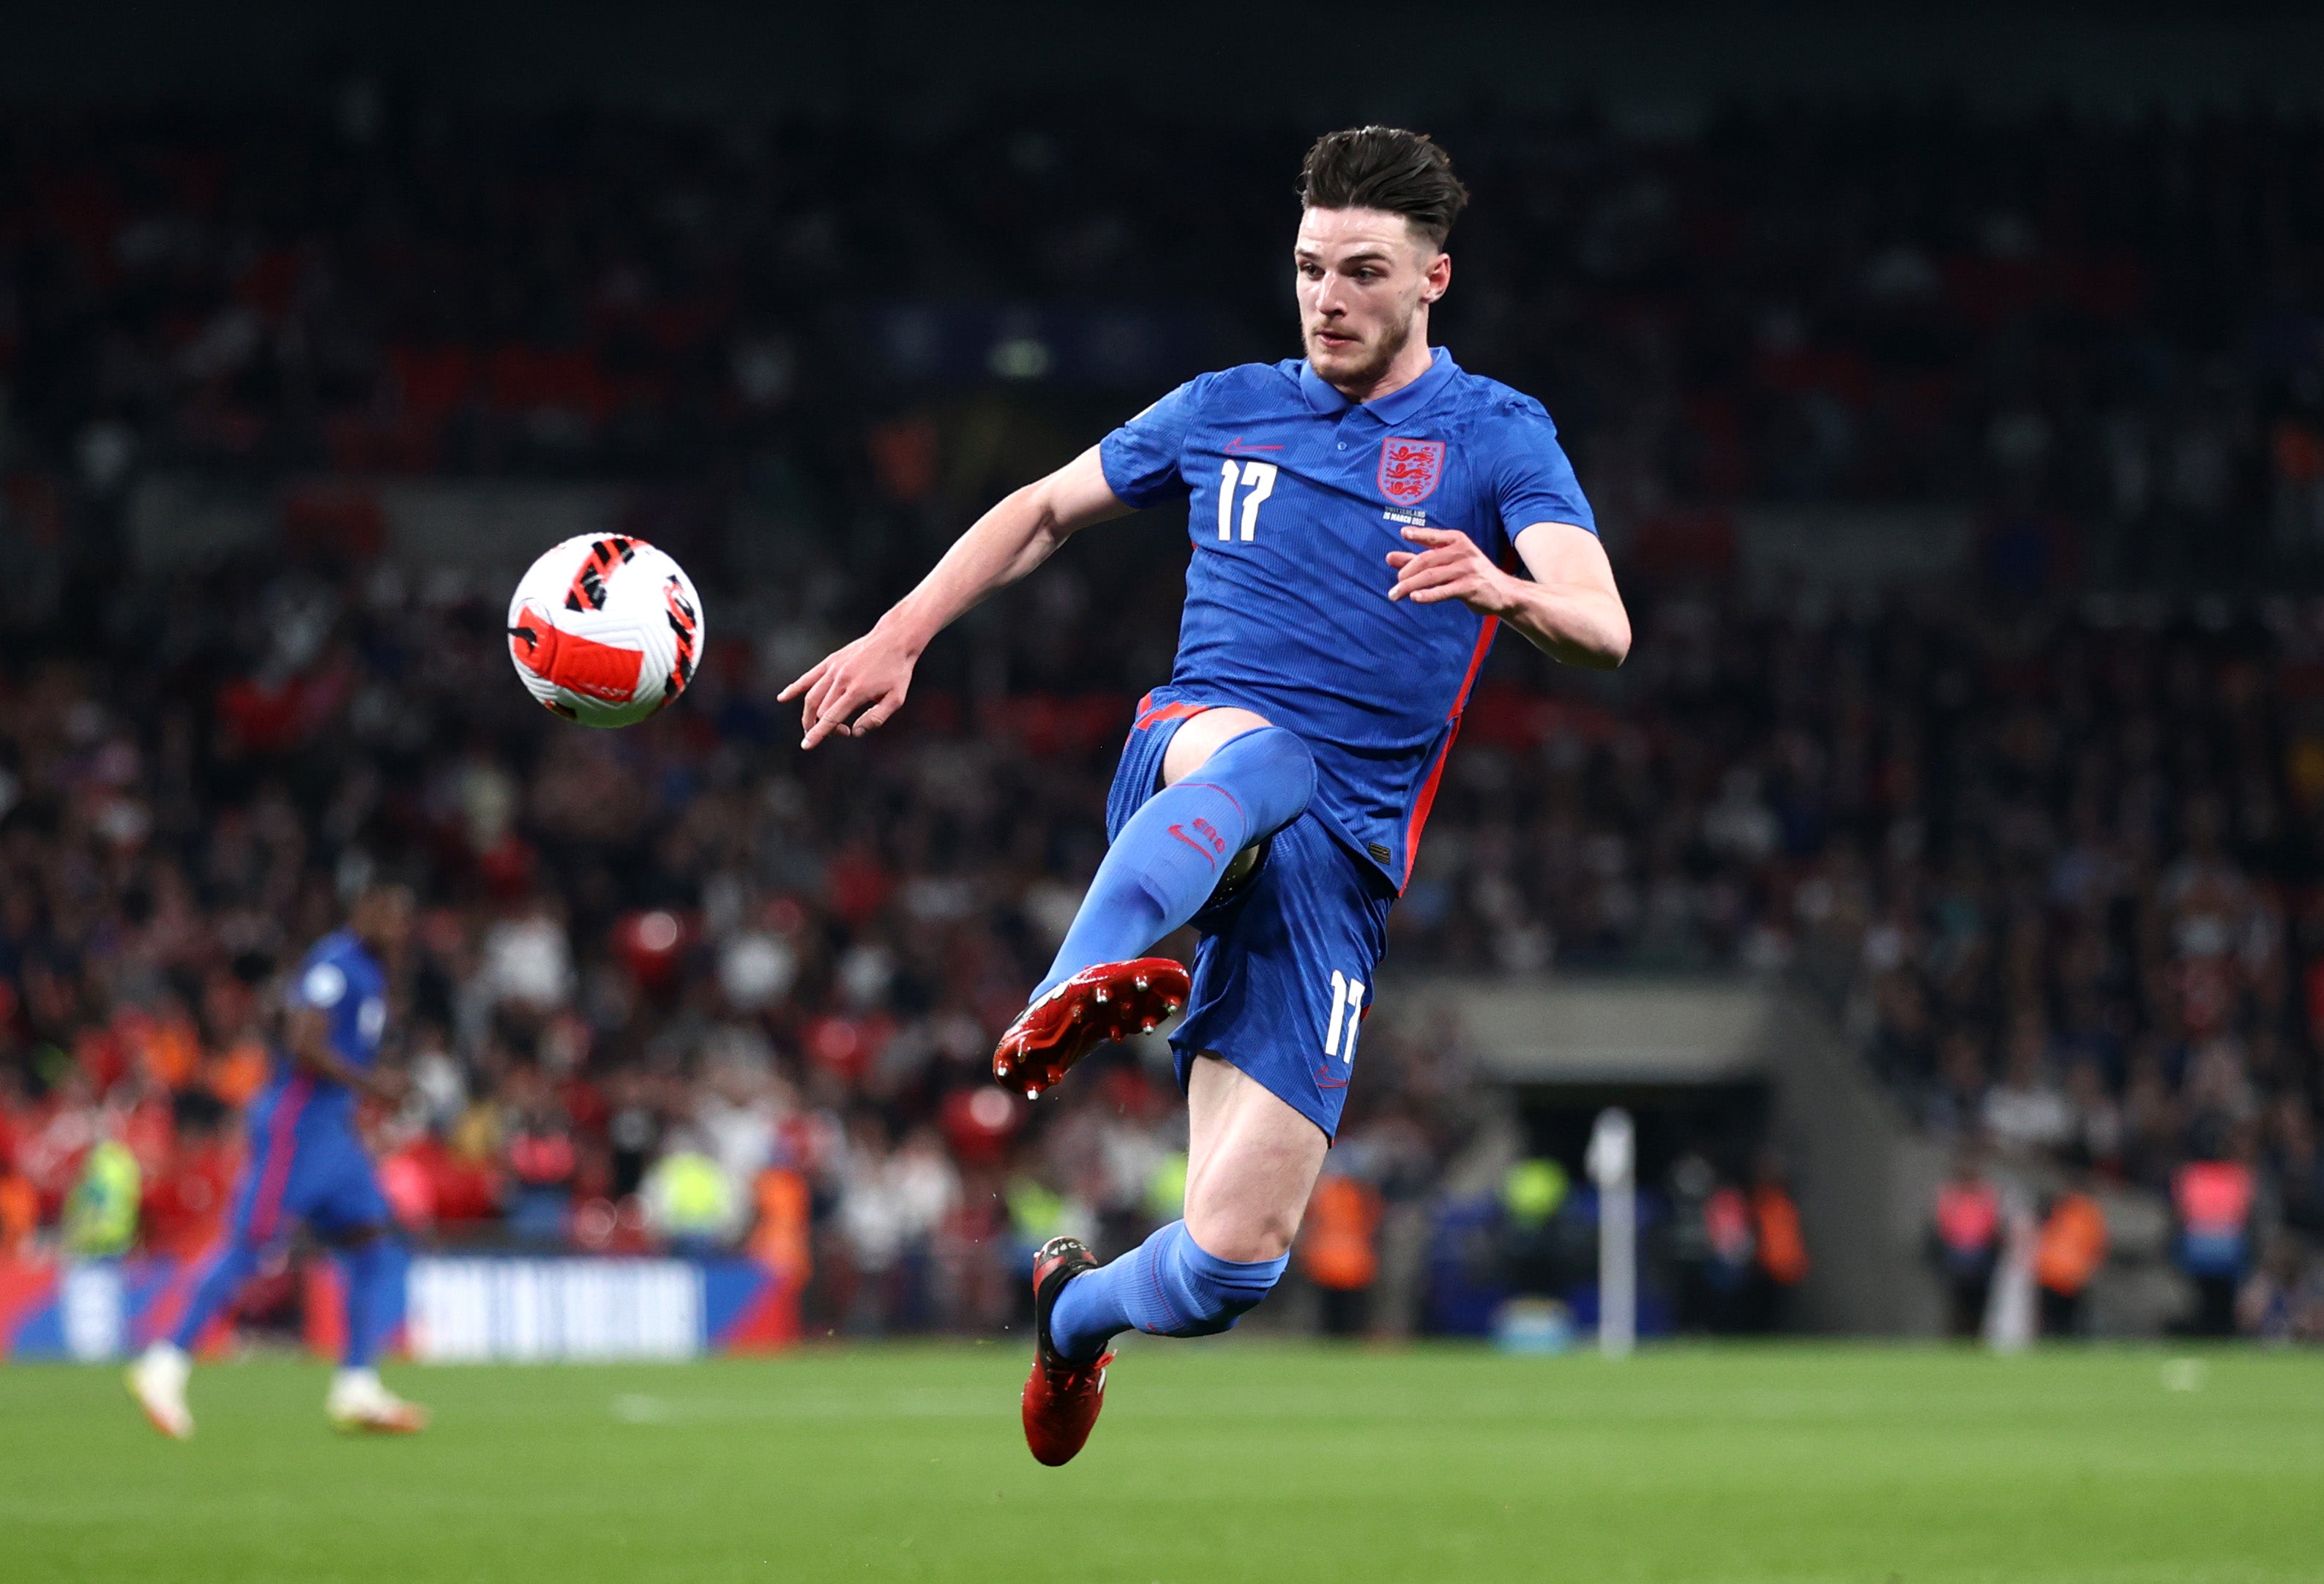 Declan Rice has transformed himself into a key figure for England over the past three years